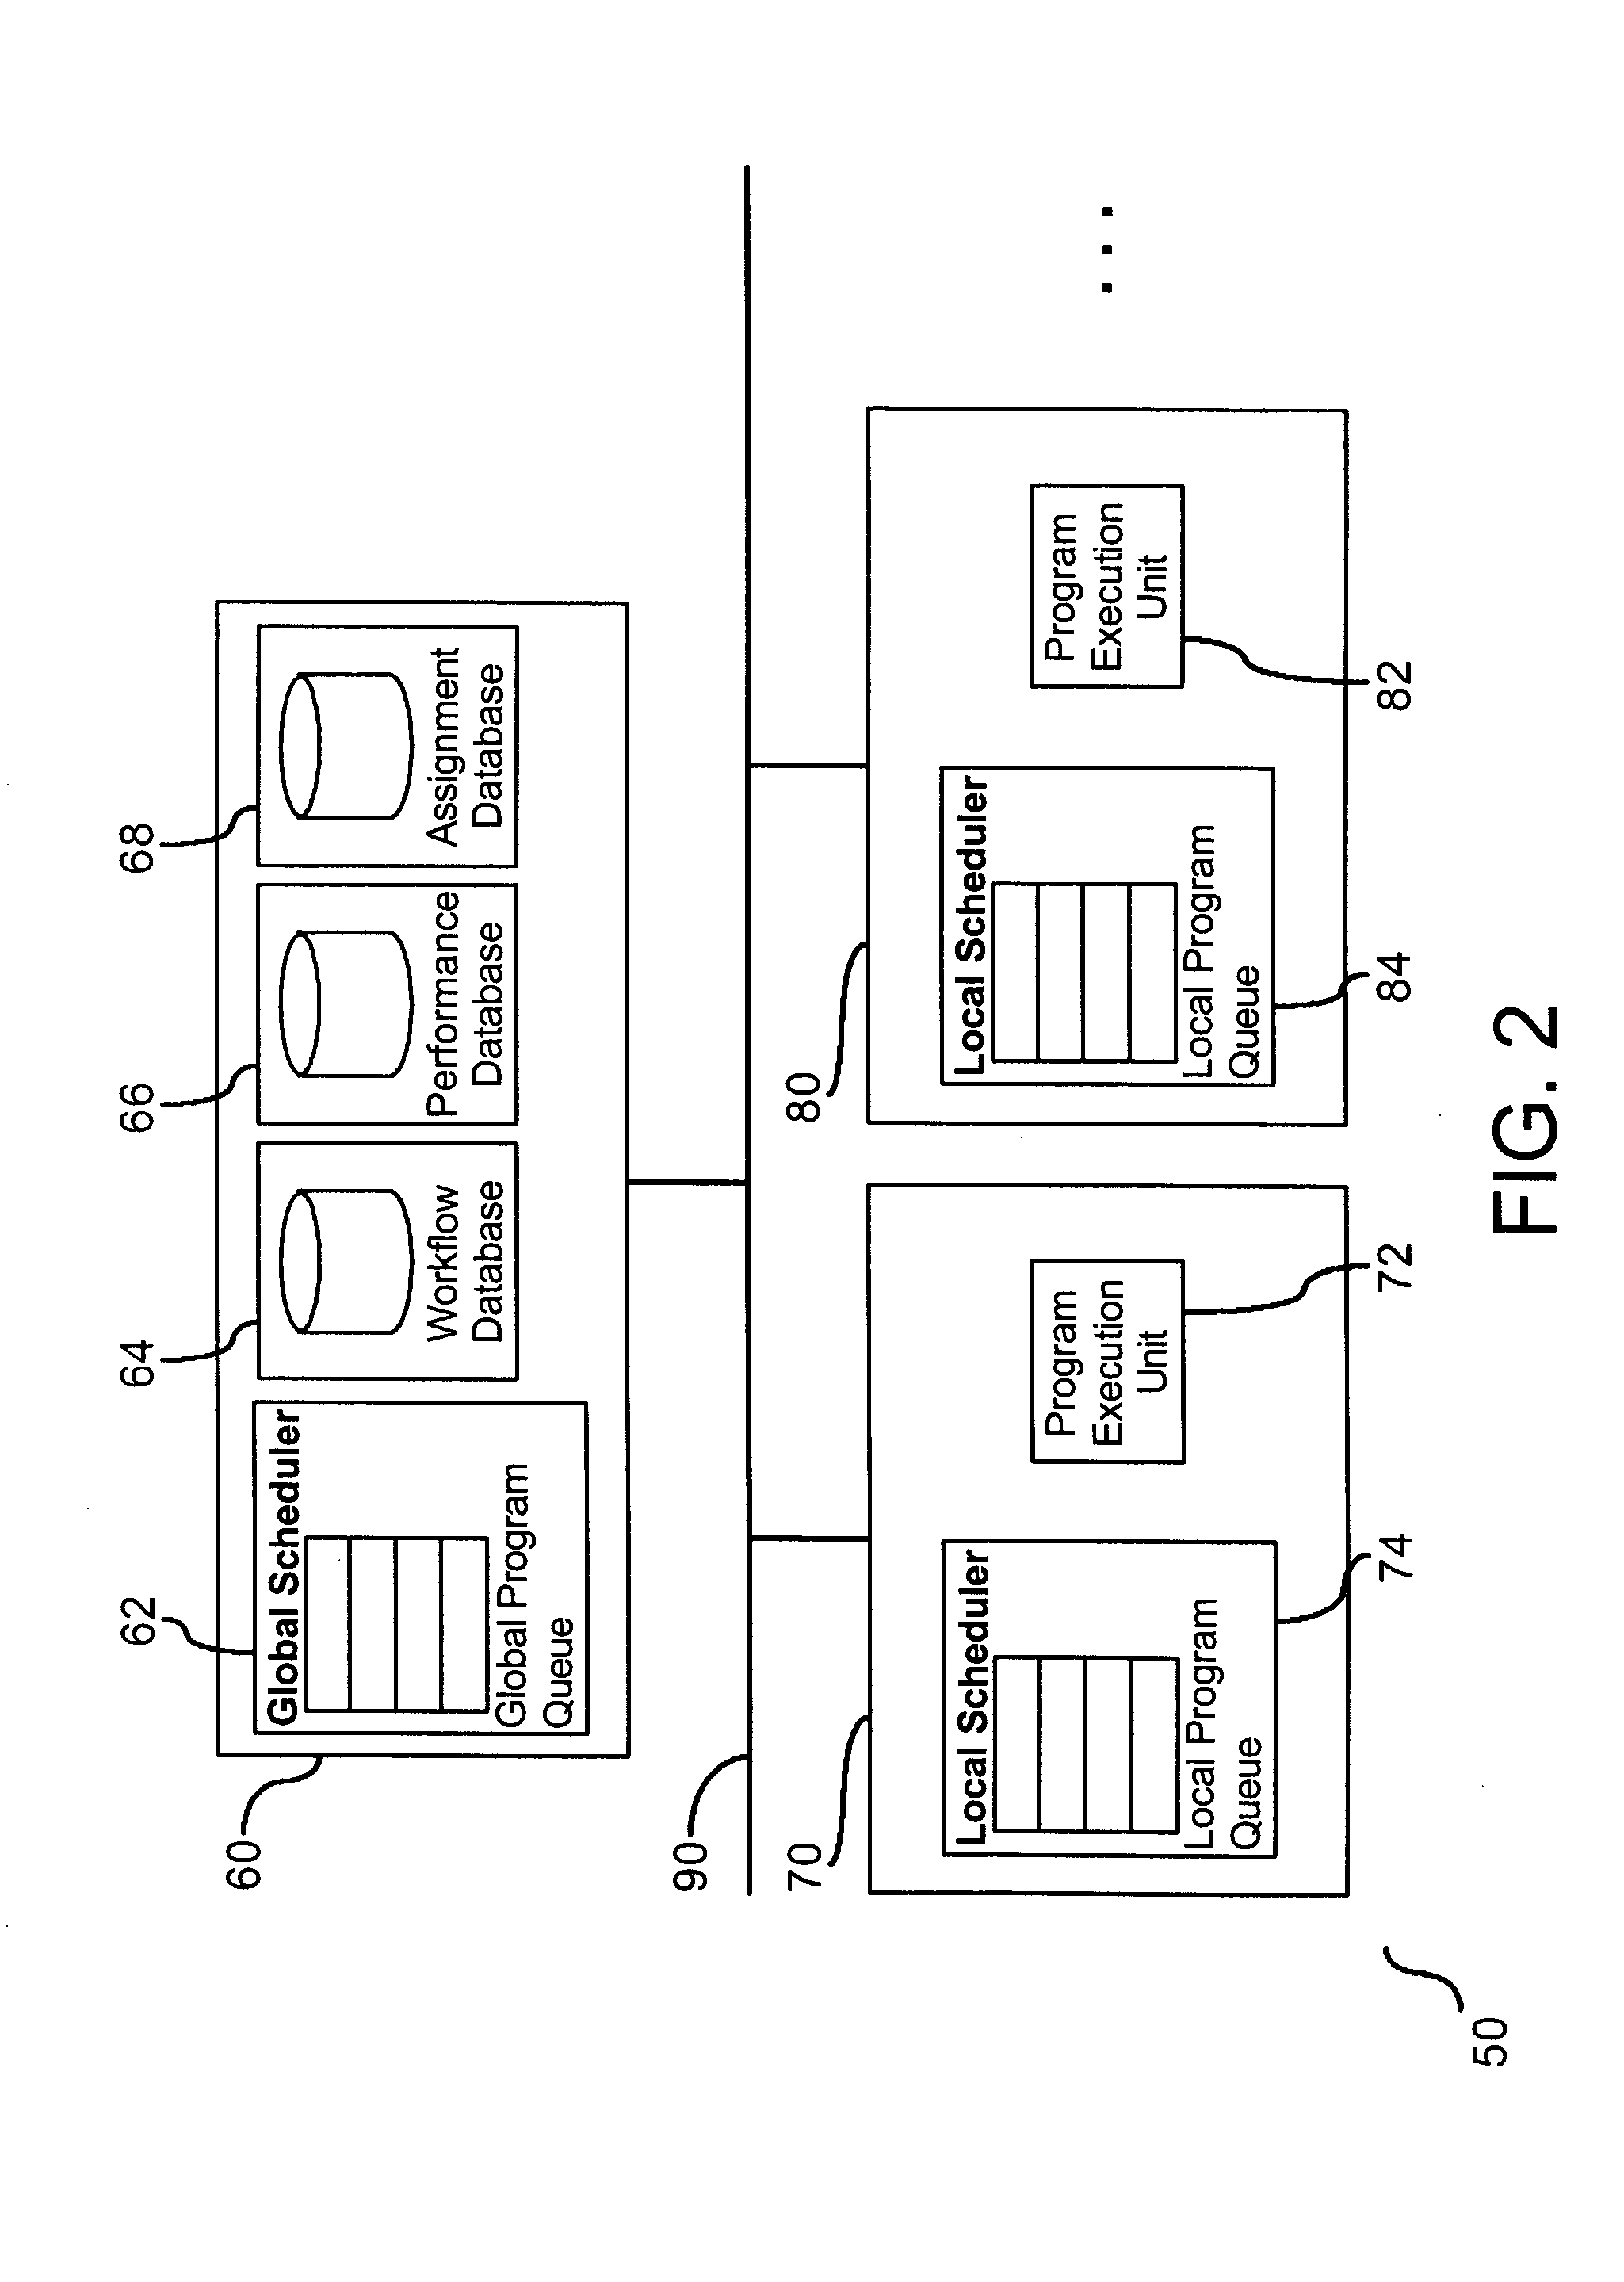 Method for dynamic scheduling in a distributed environment